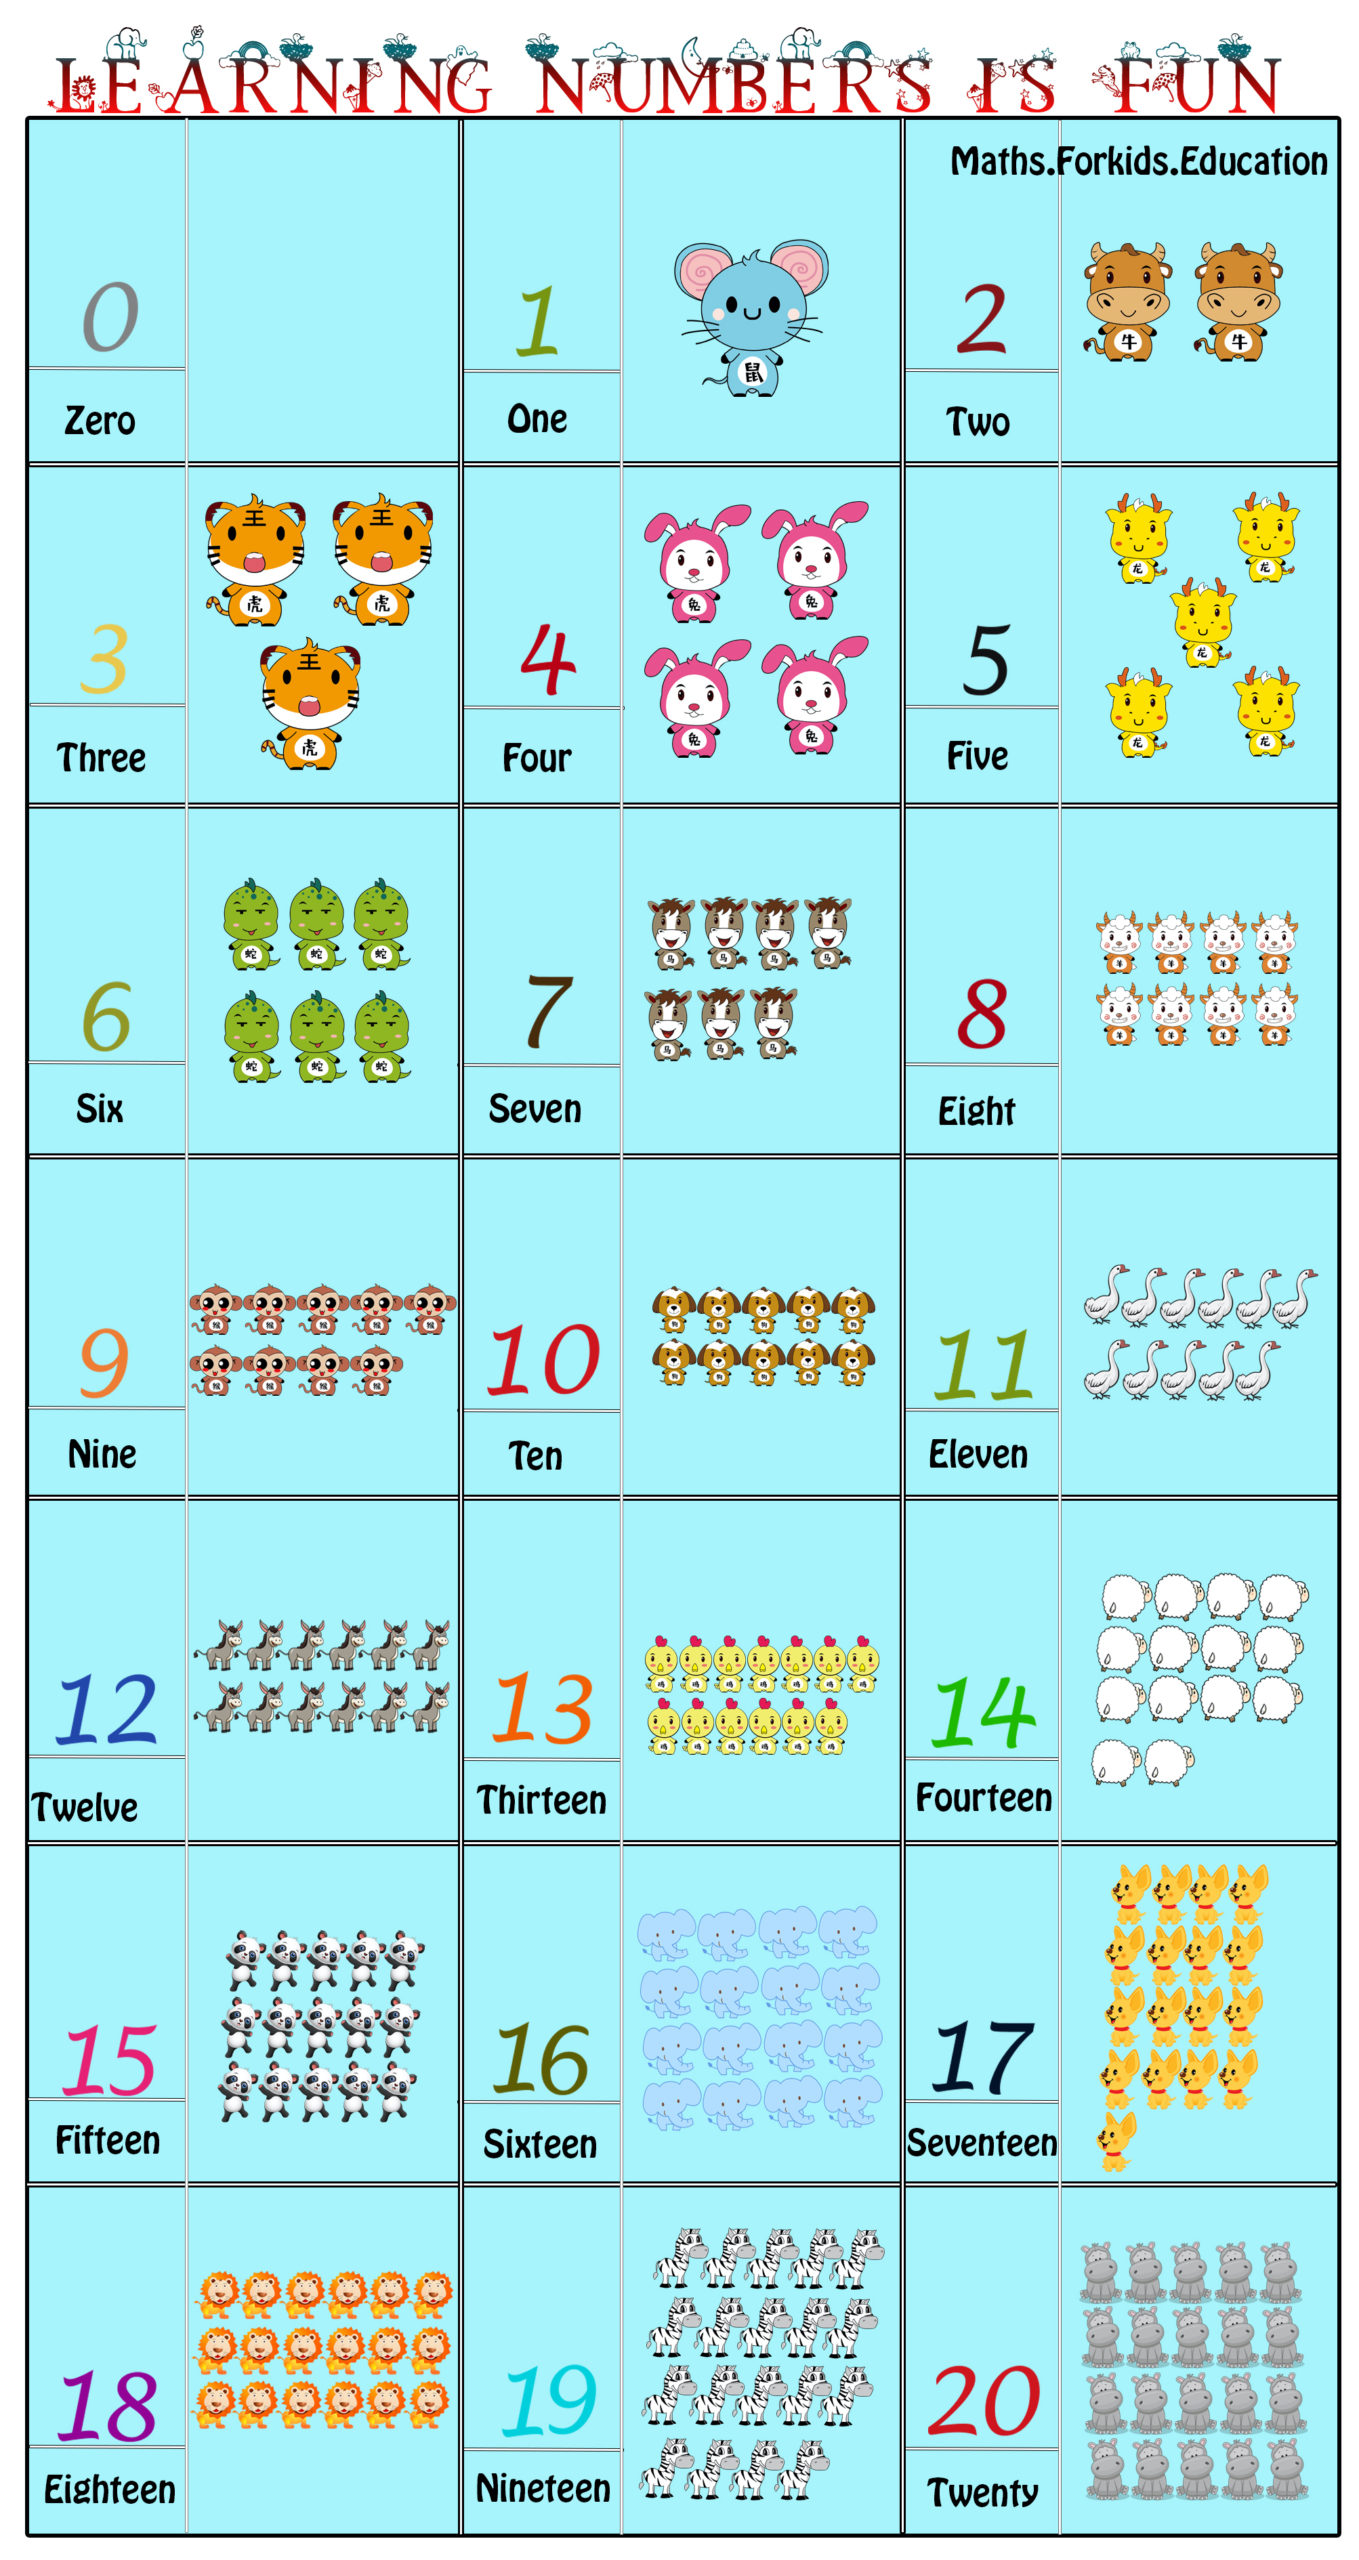 1 to 100 Number Counting, Count to 1-100 - For kids